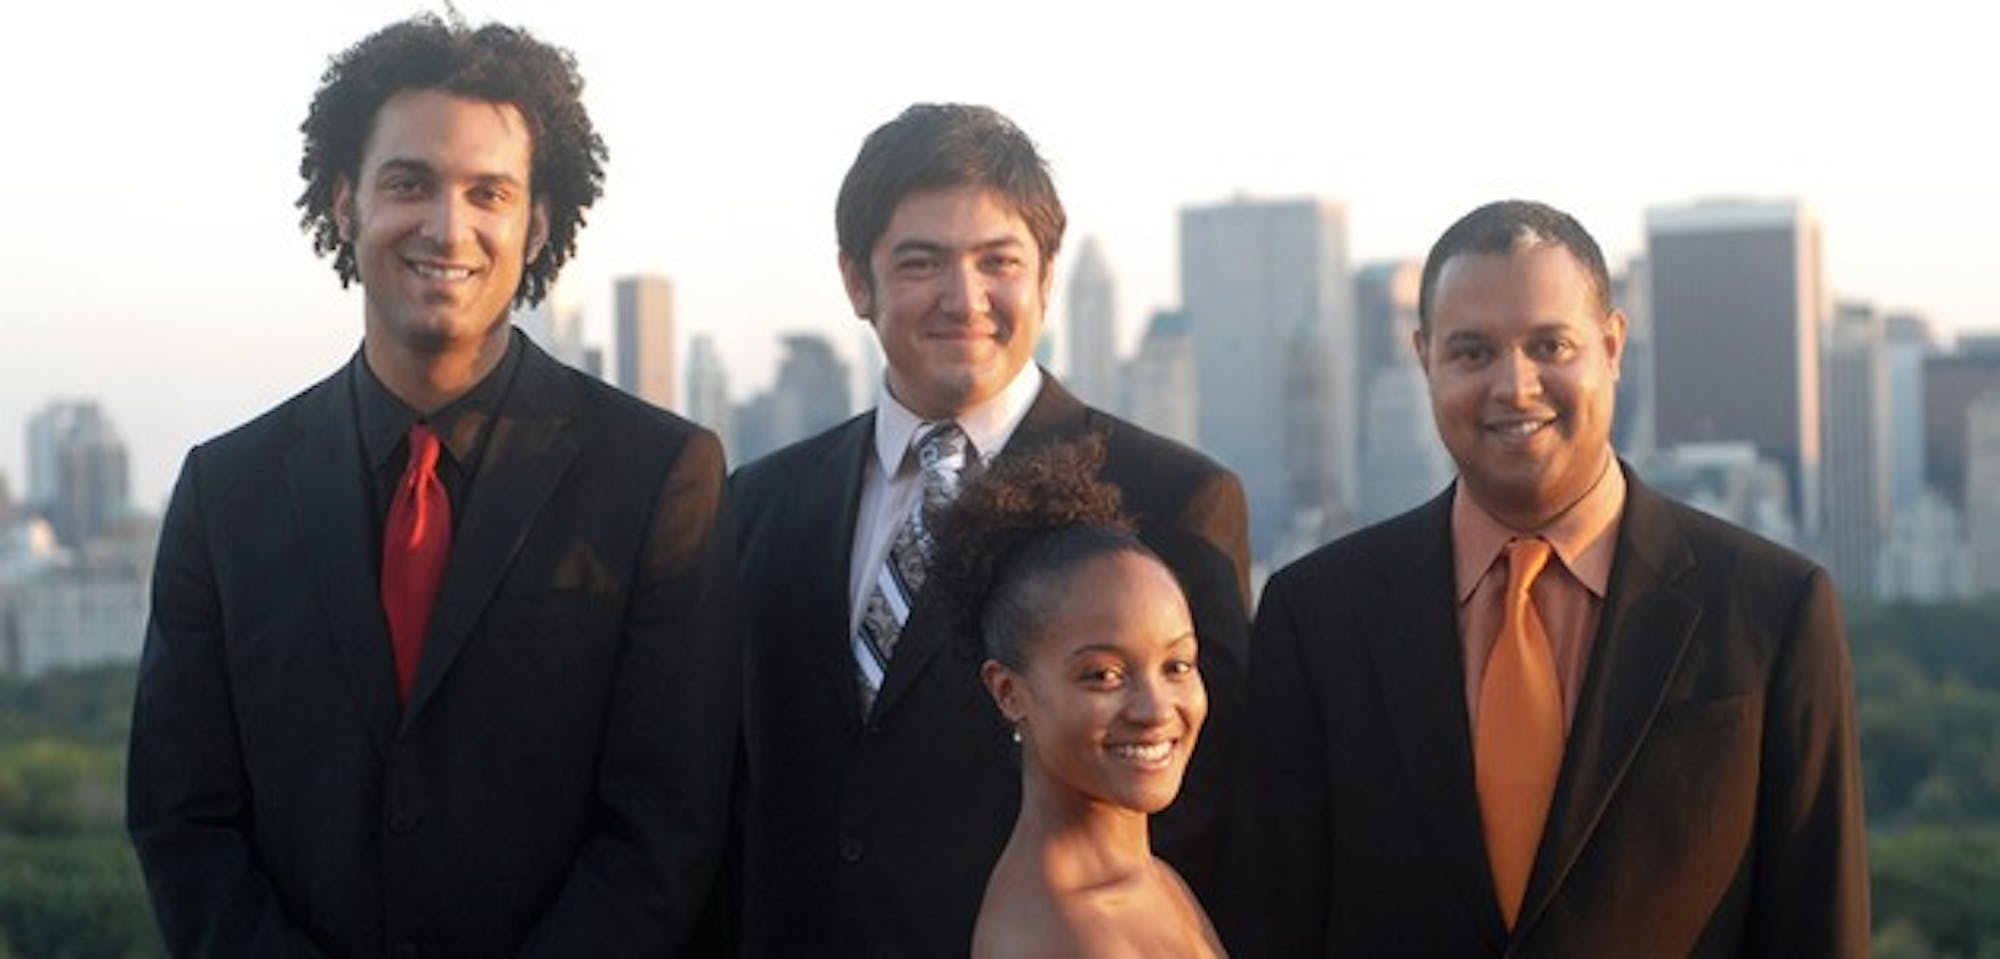 The Harlem String Quartet will perform a merger of jazz and classical music genres to a sold-out audience tonight.